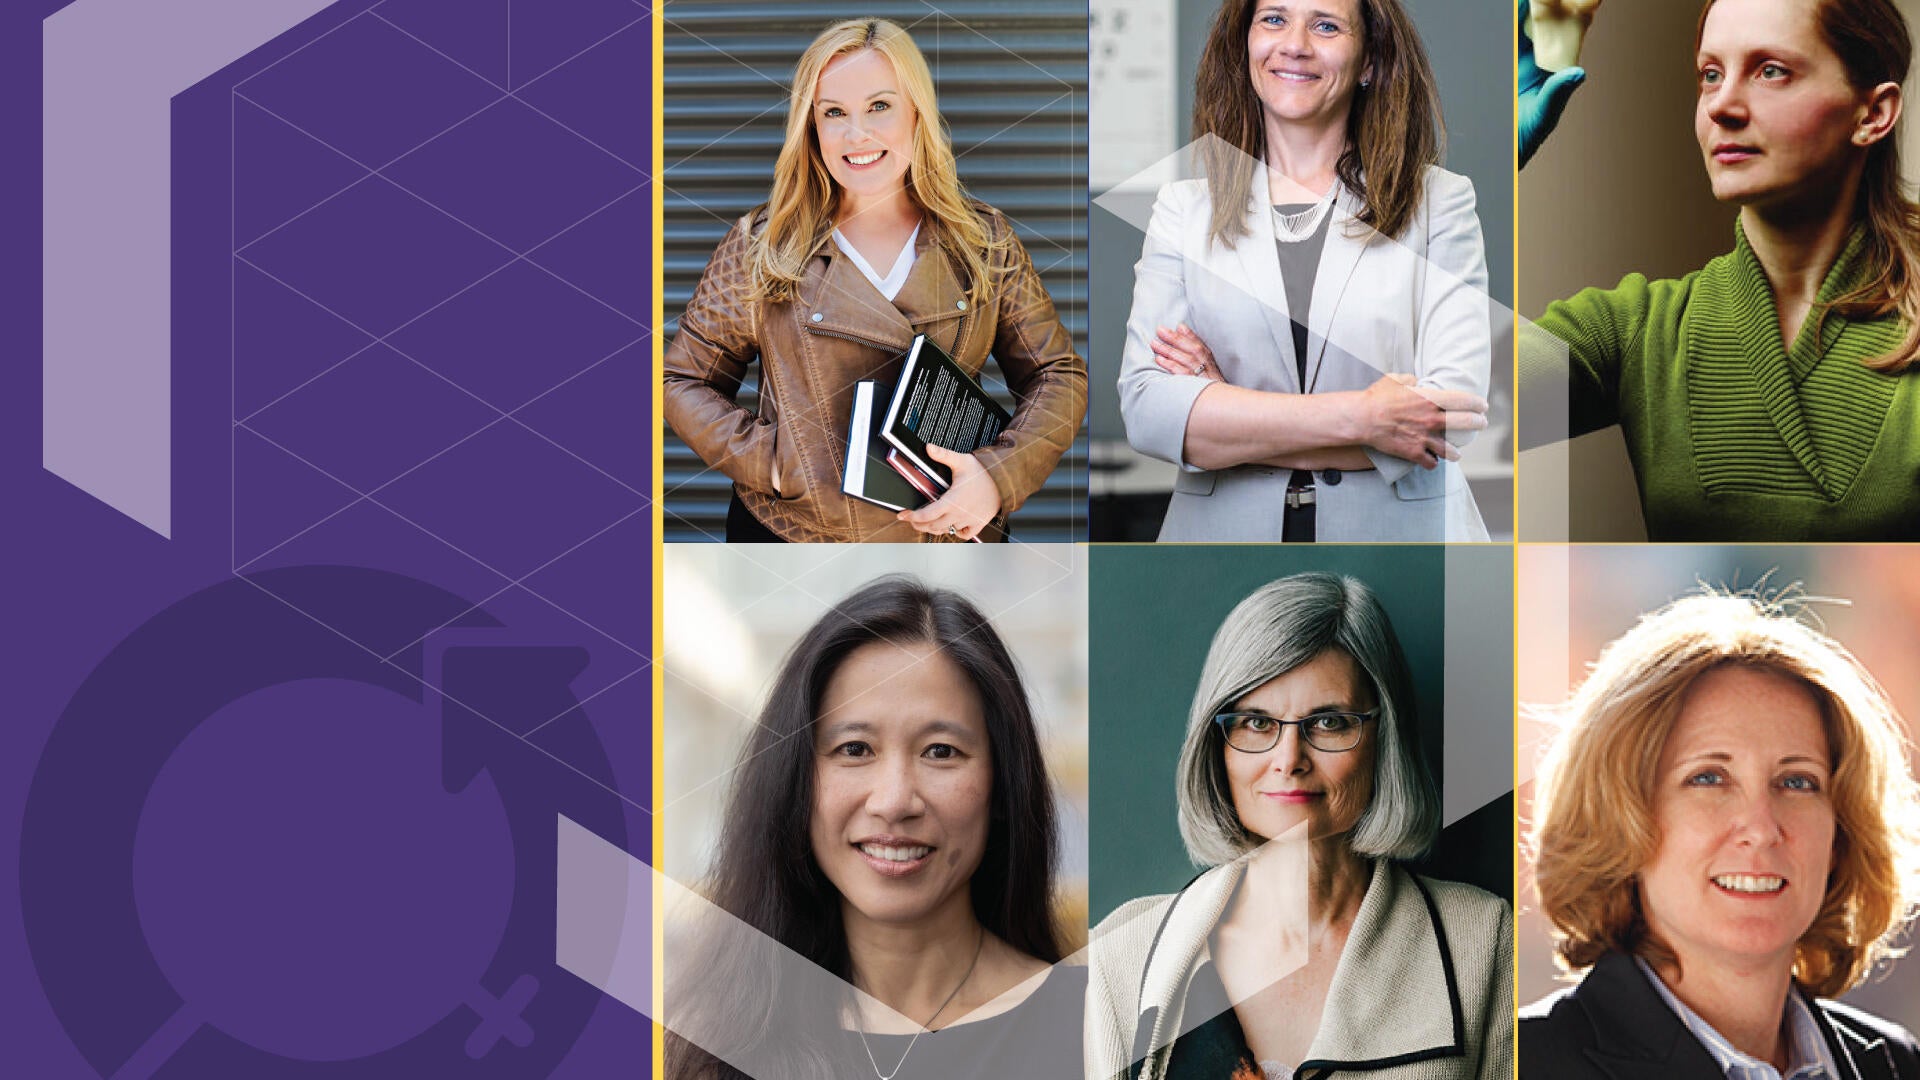 Six female researchers tiled next to a purple background